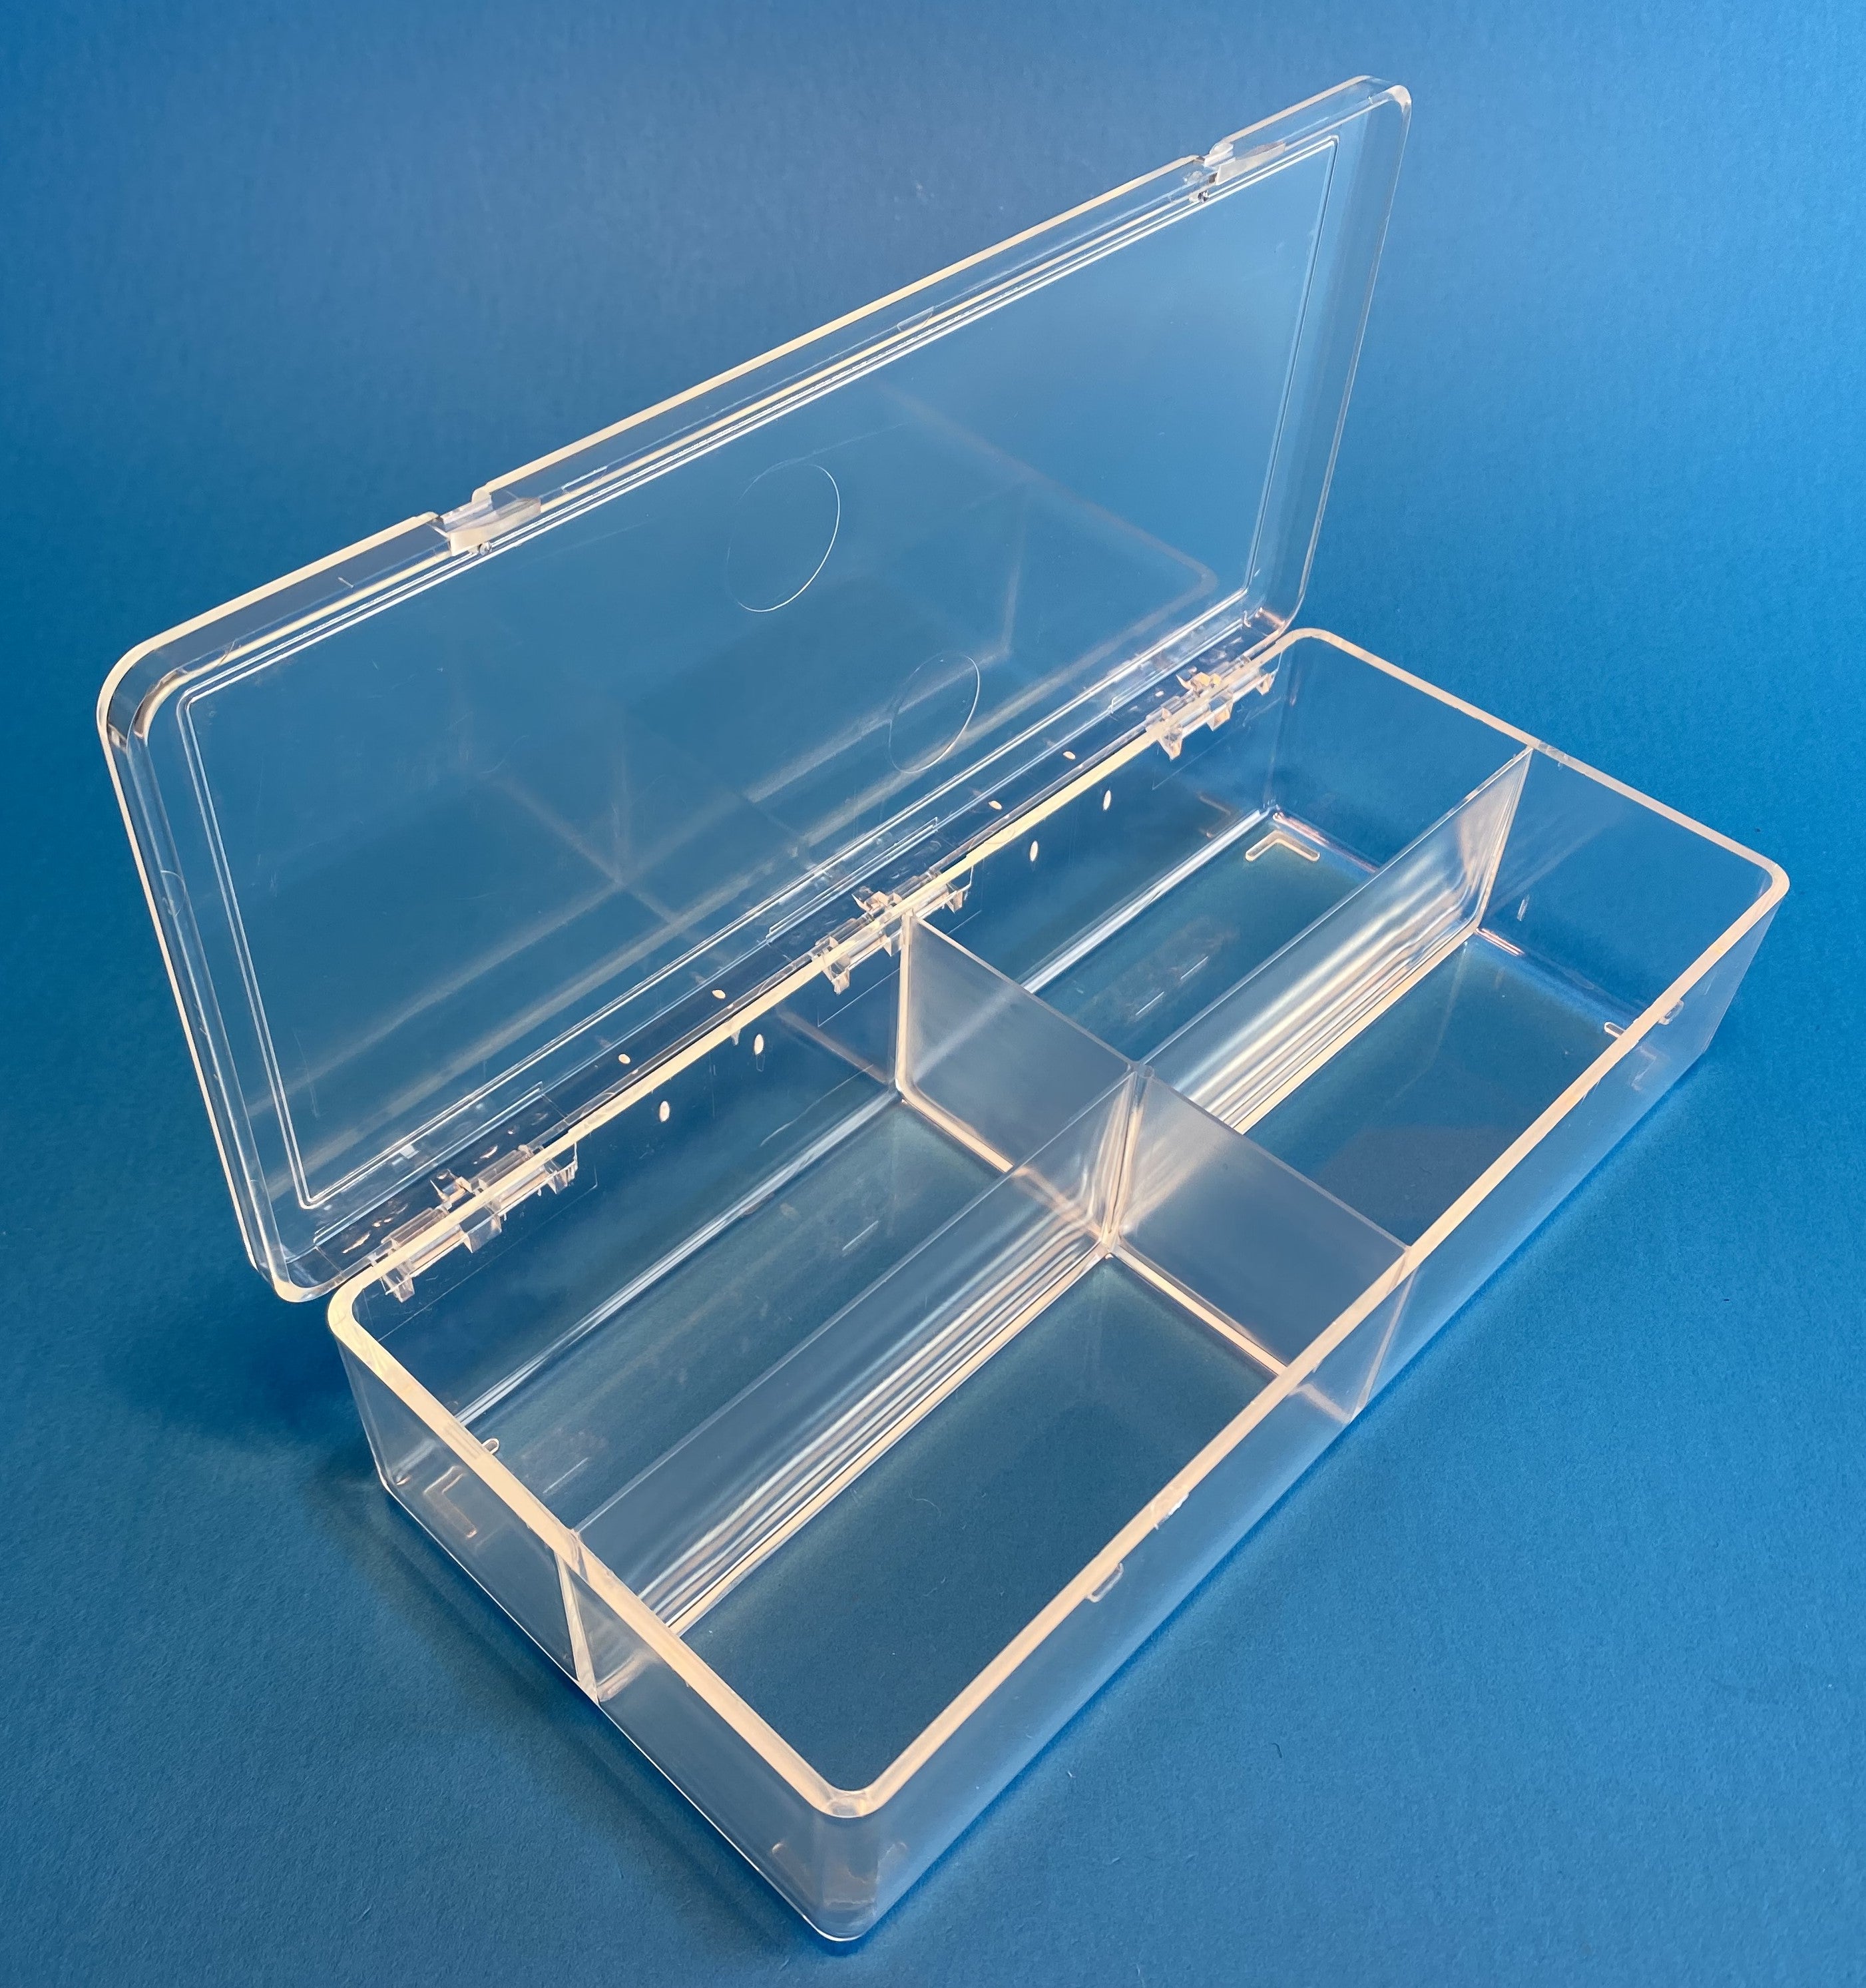 D54 Case, 4 Bays, Clear Impact-Protected Copolymer (carton of 36 ea)